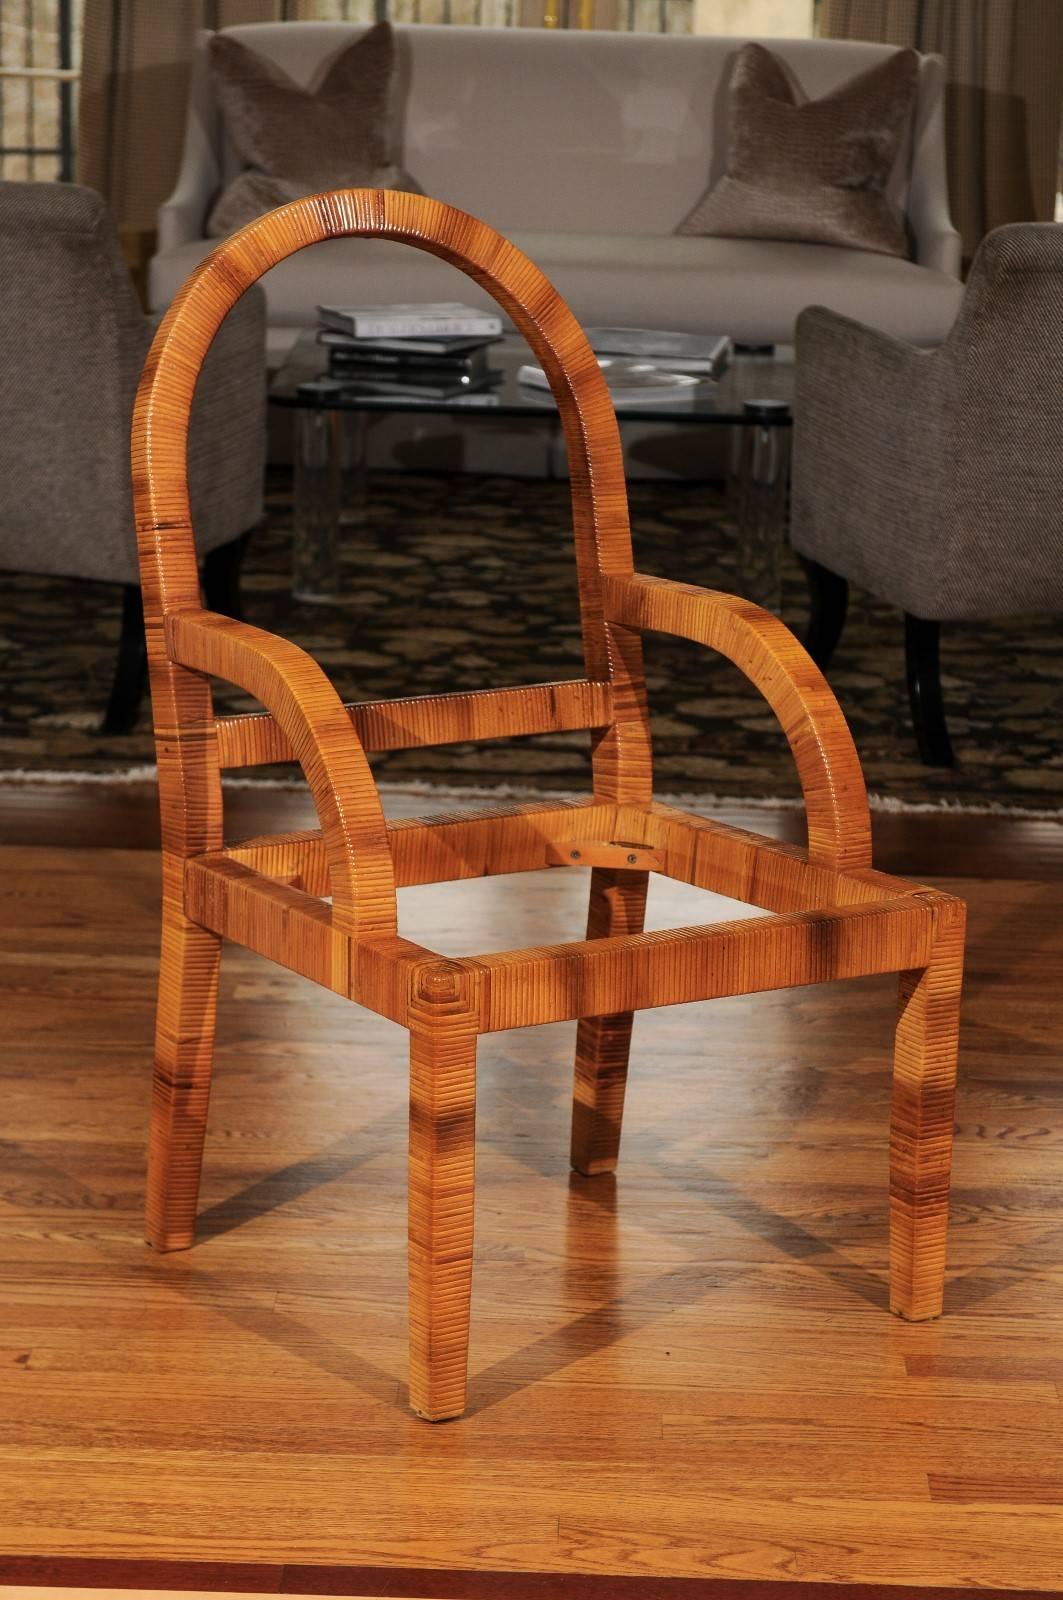 A stunning set of four armchairs by Bielecky Brothers, circa 1980. Heavy, stout solid hardwood form painstakingly hand-wrapped in cane. Exceptional quality, style and craftsmanship. May be sold as pairs. The arm height is 25 inches. Stellar jewelry!